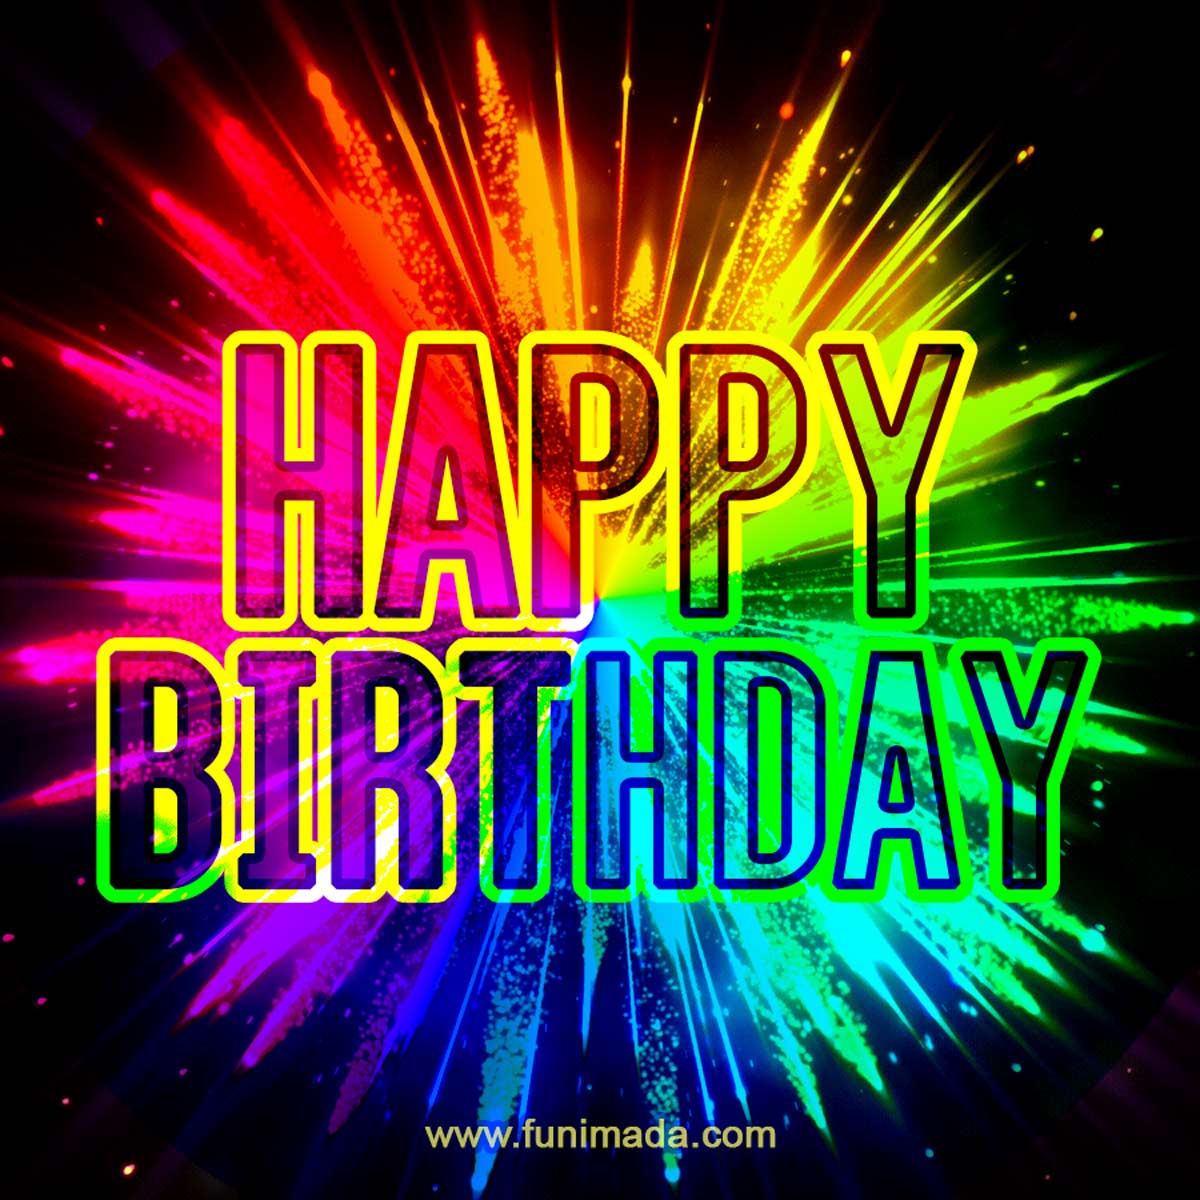 May your birthday sparkle with joy, just like the colorful fireworks that light up the night sky